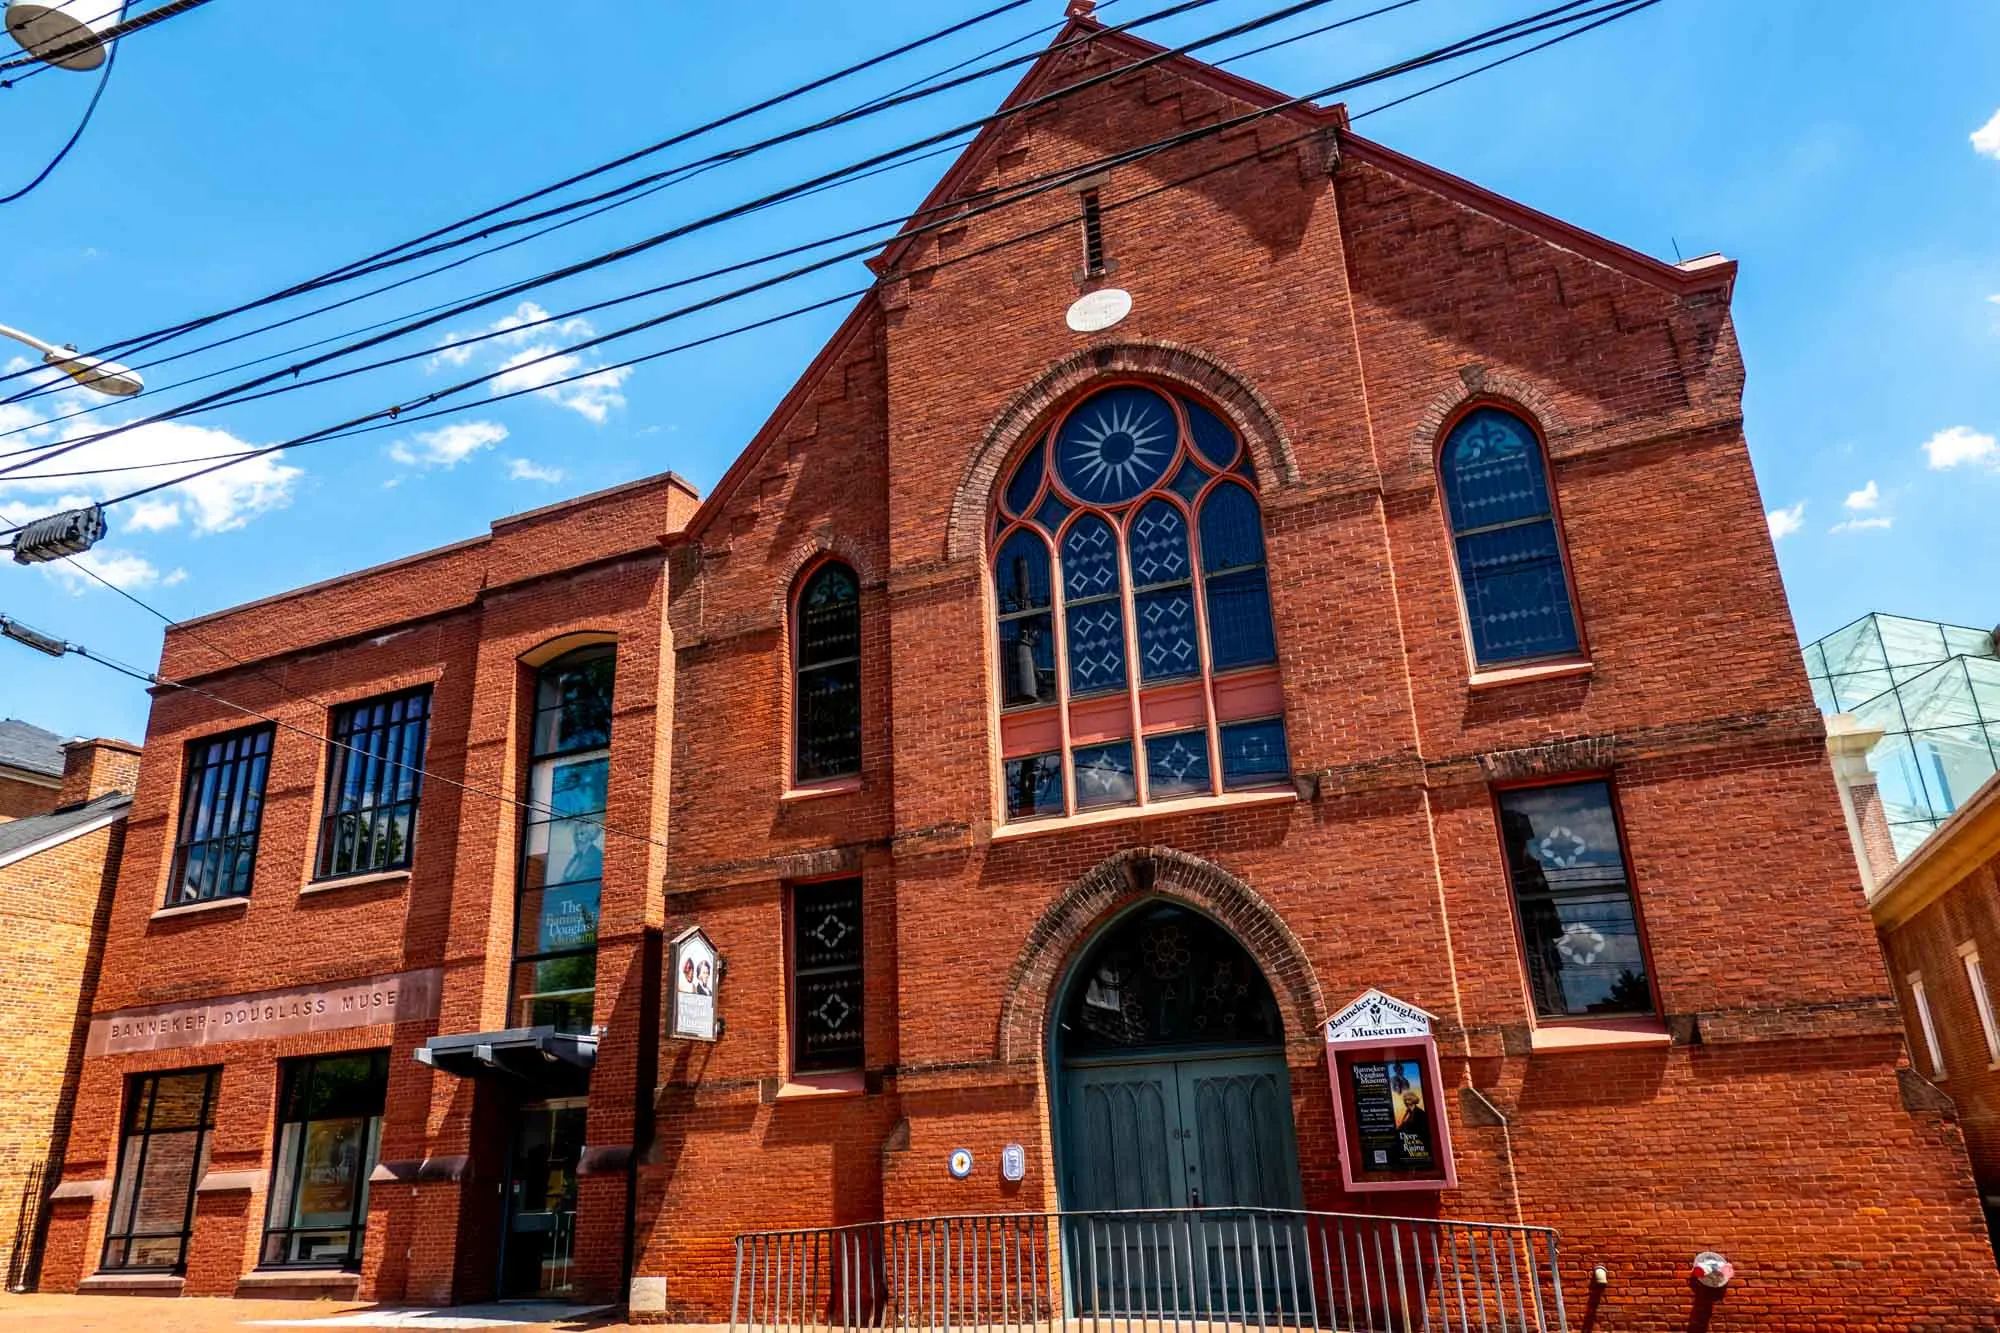 Exterior of a red brick church with stained glass windows.